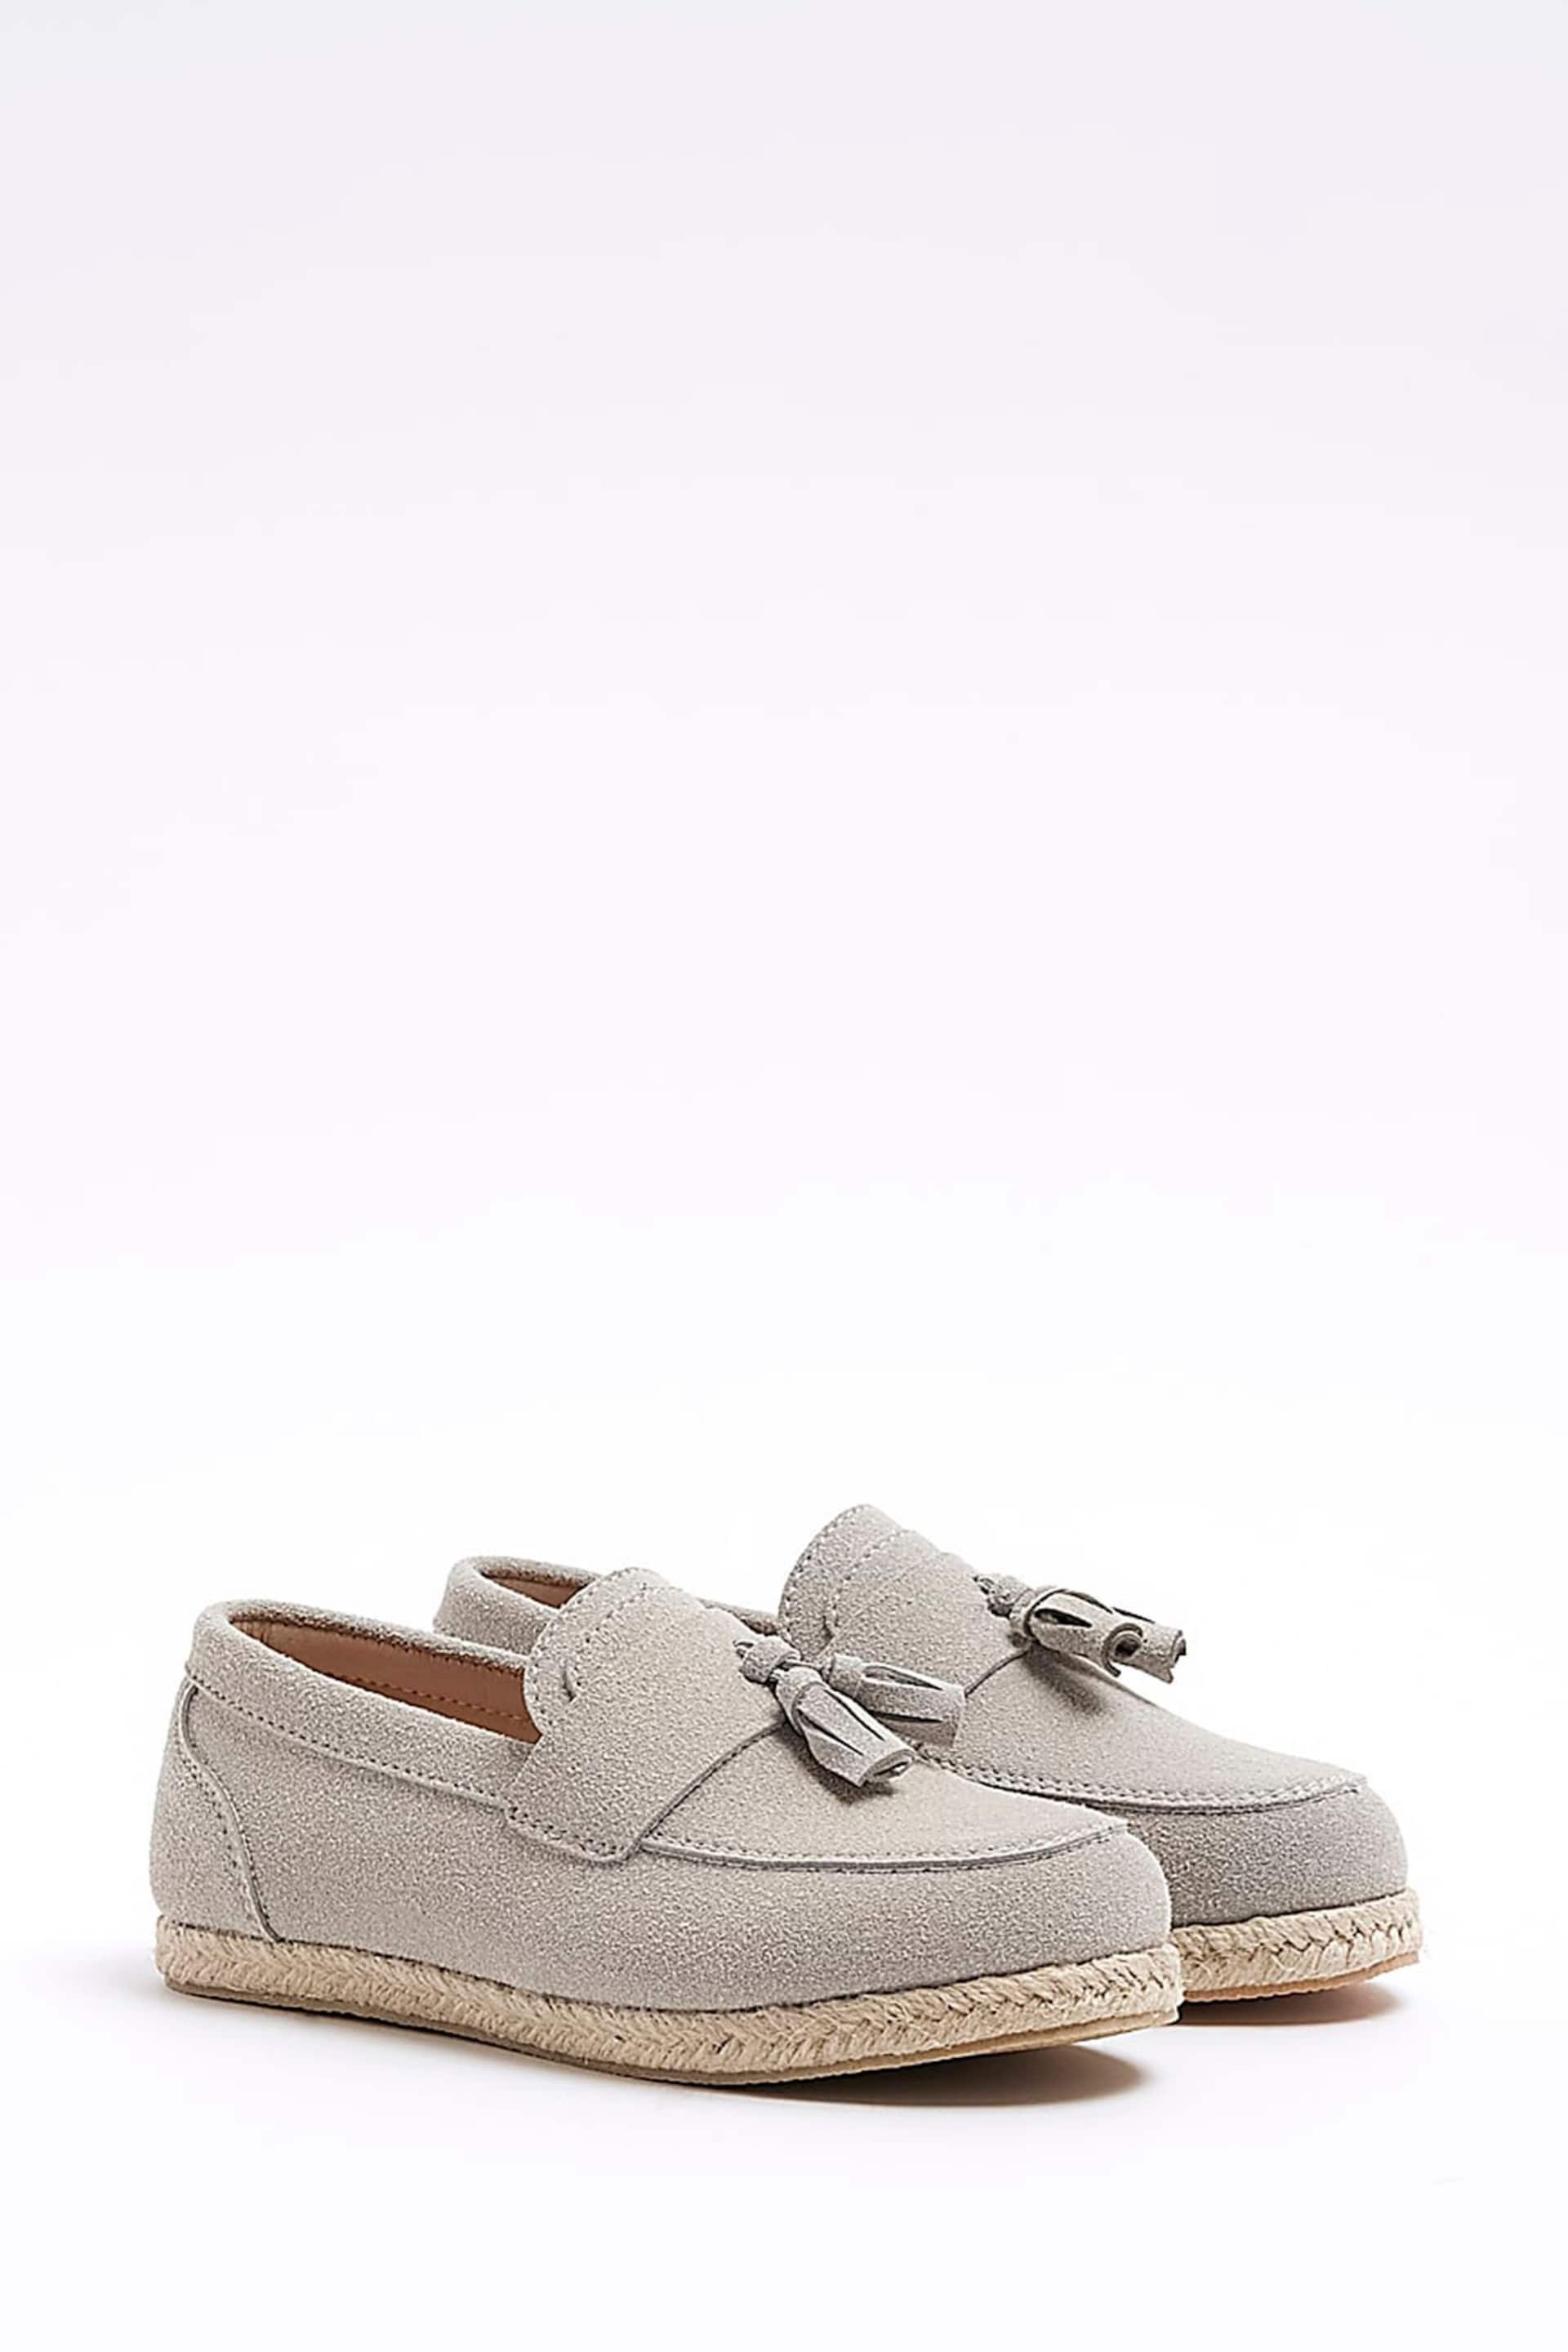 River Island Grey Boys Faux Fur Suede Espadrilles Loafers - Image 2 of 4